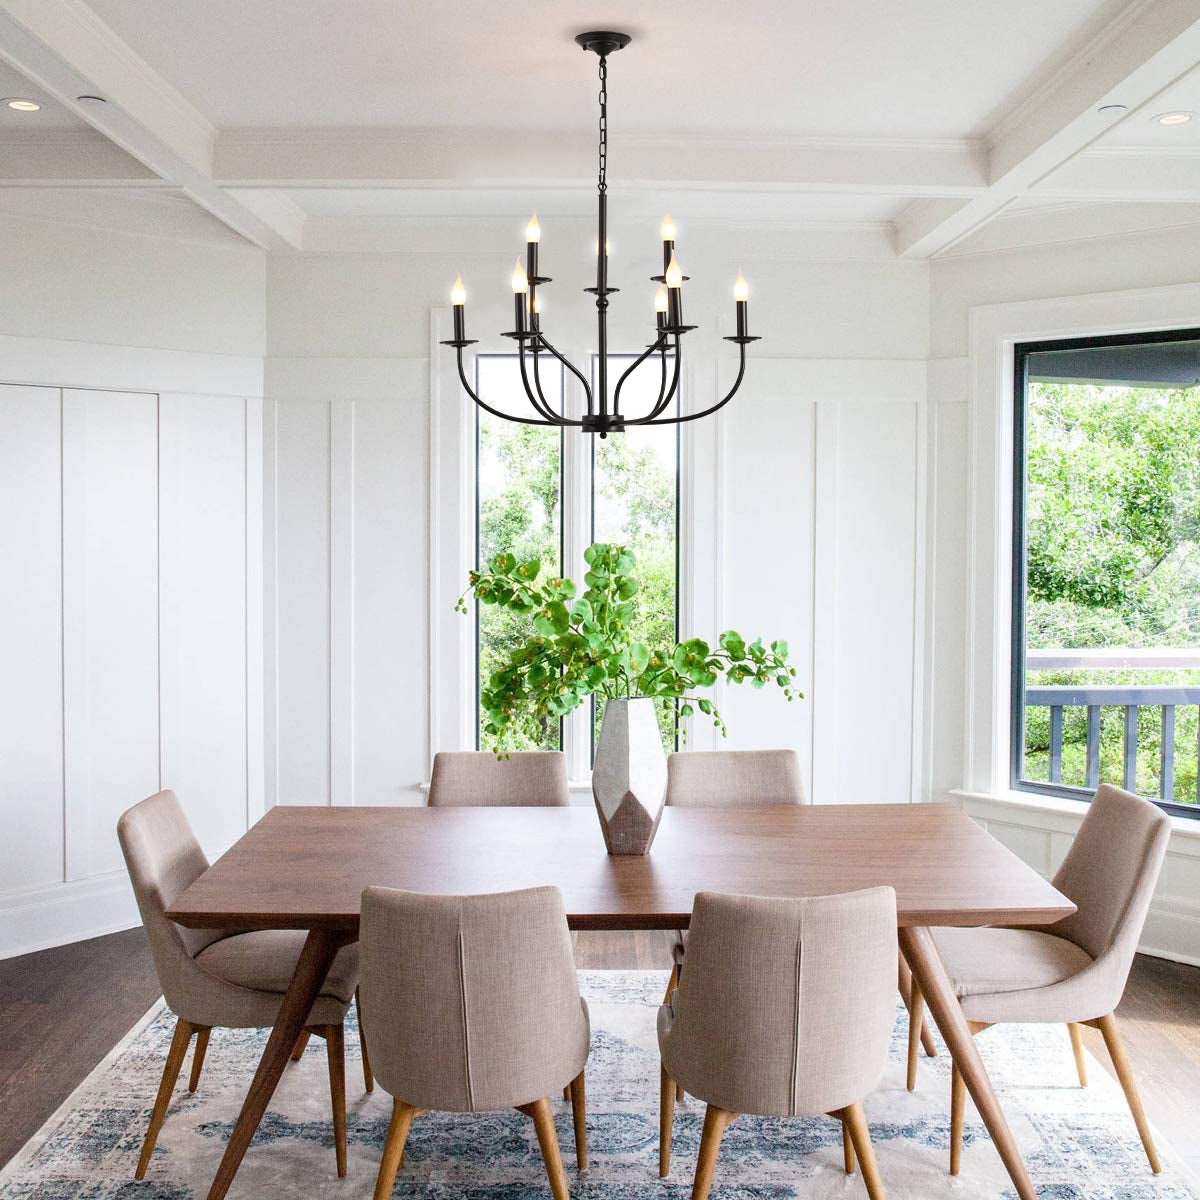 Nine Bulb Classic Black Chandelier shown over dining table